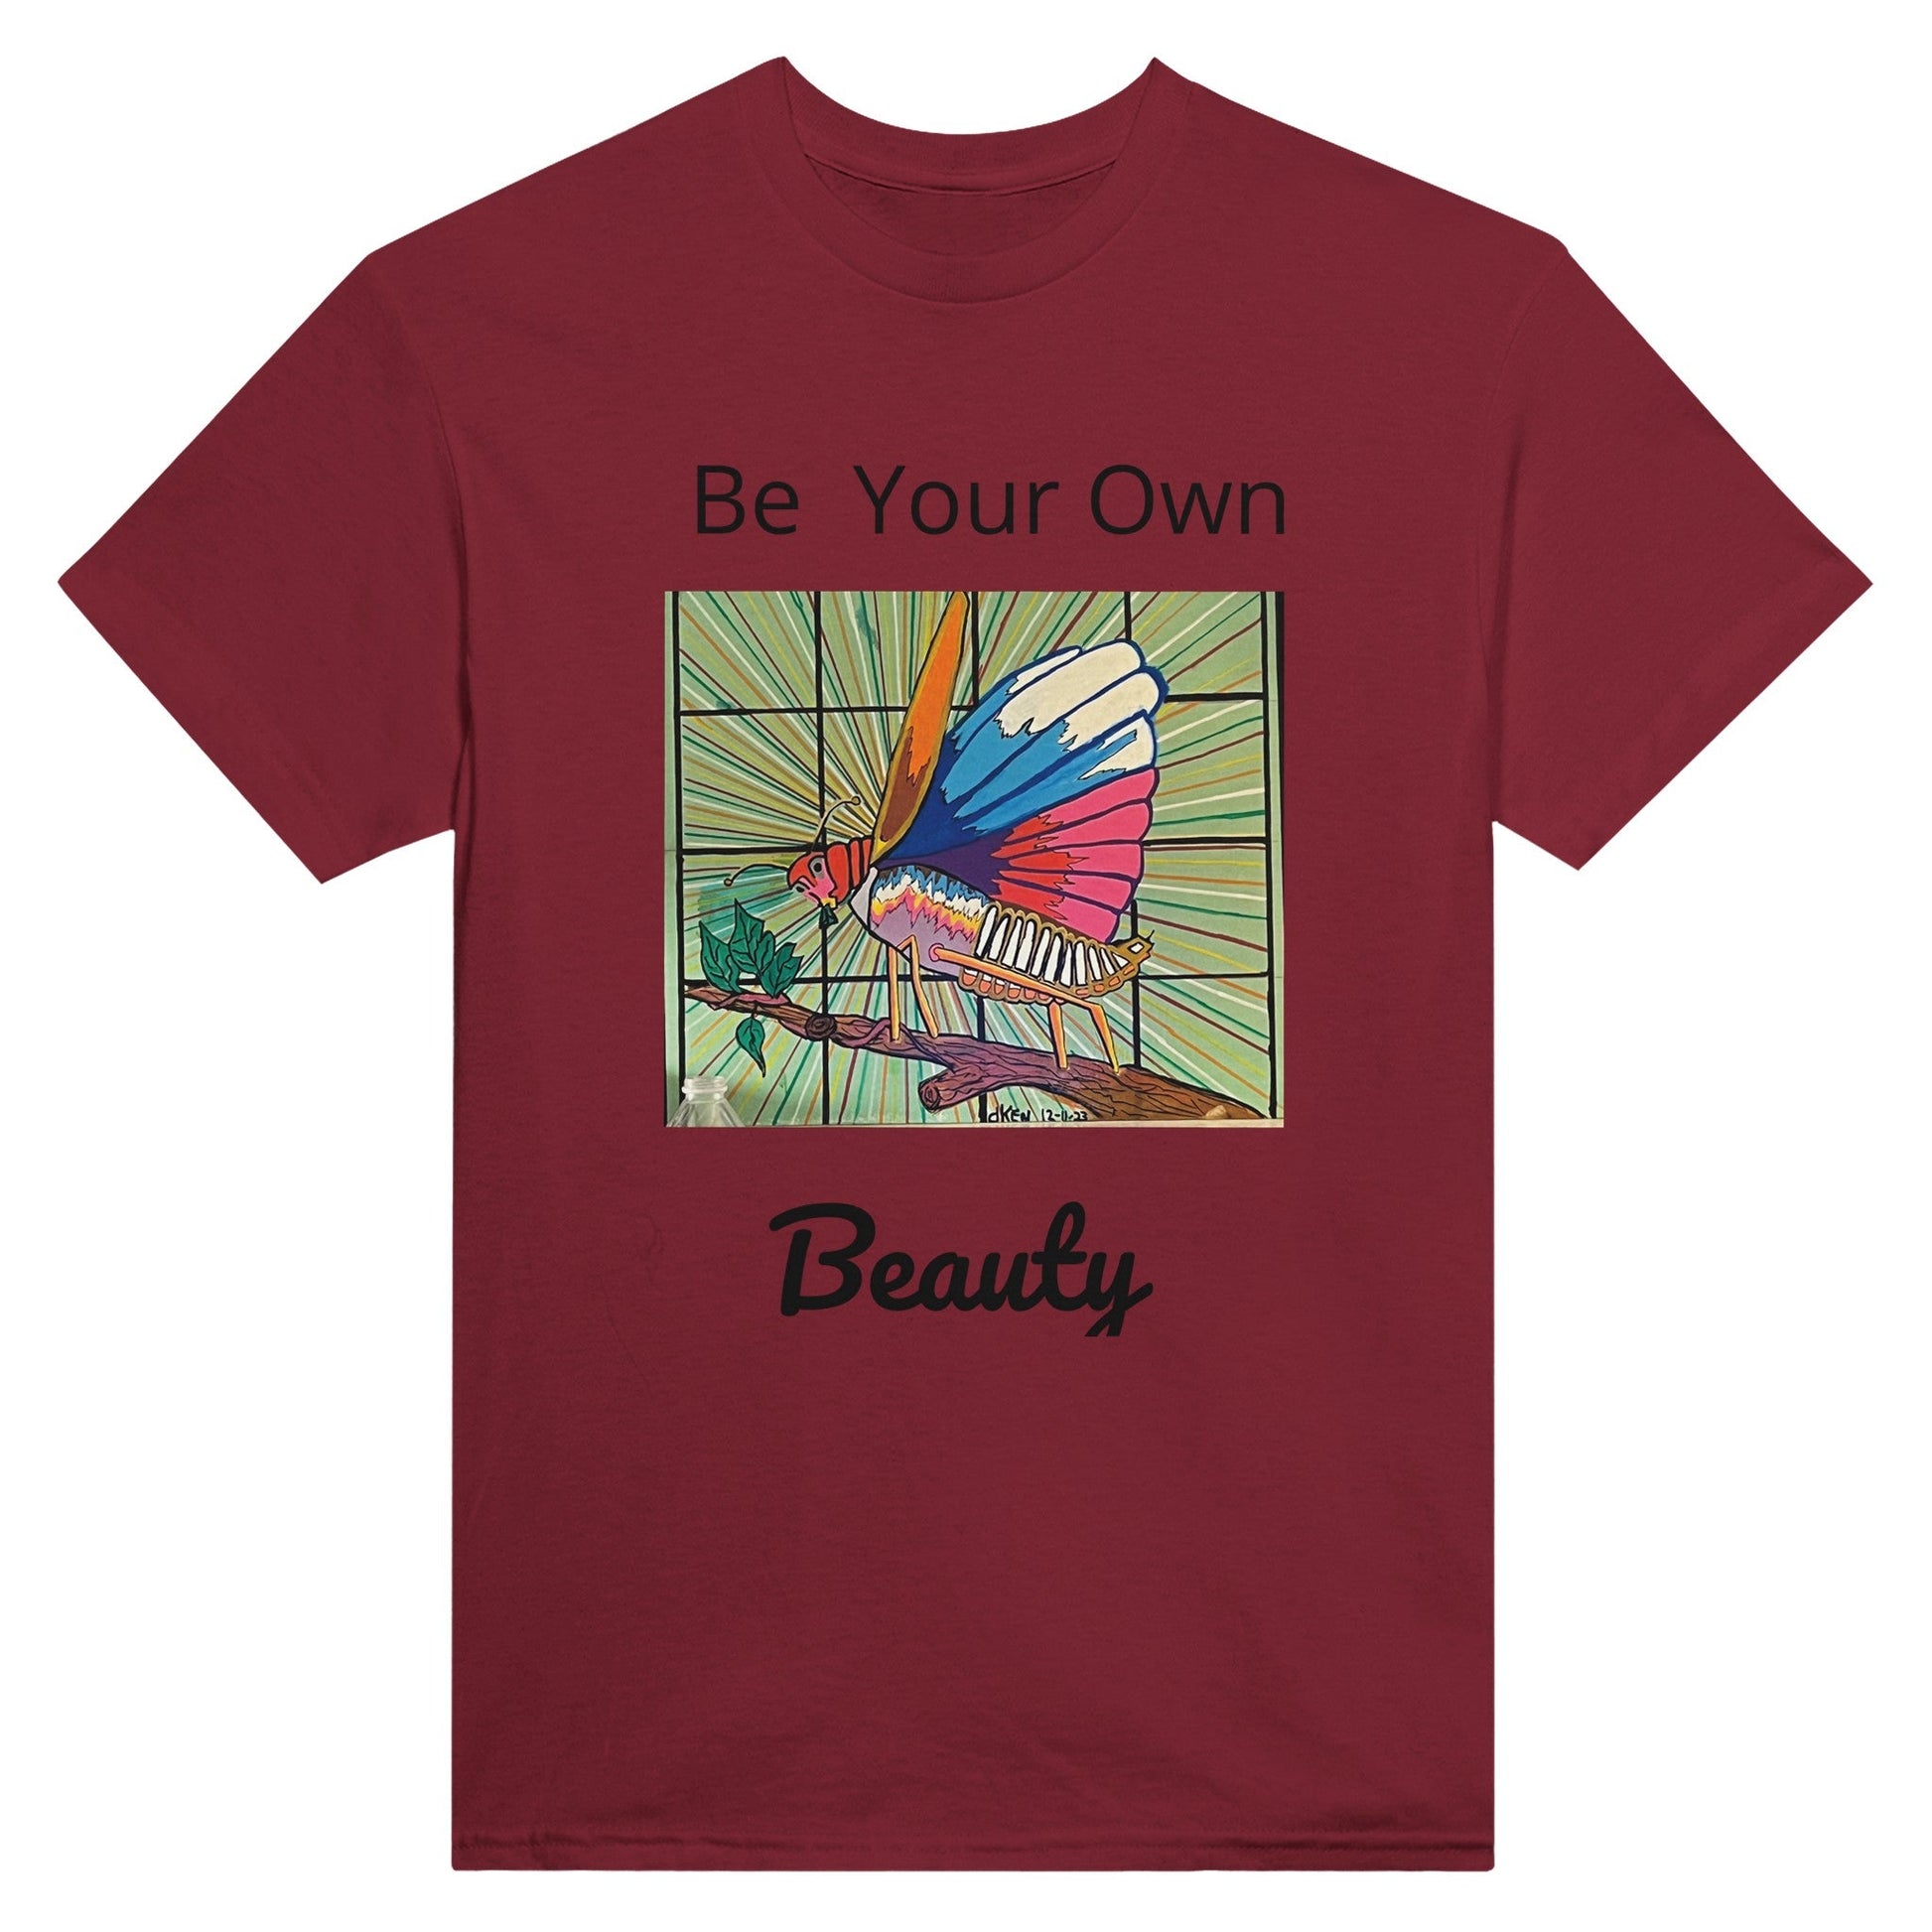 Heavyweight Unisex Crewneck T-shirt - Be Your Own Beauty | Kid-Epics Expressions